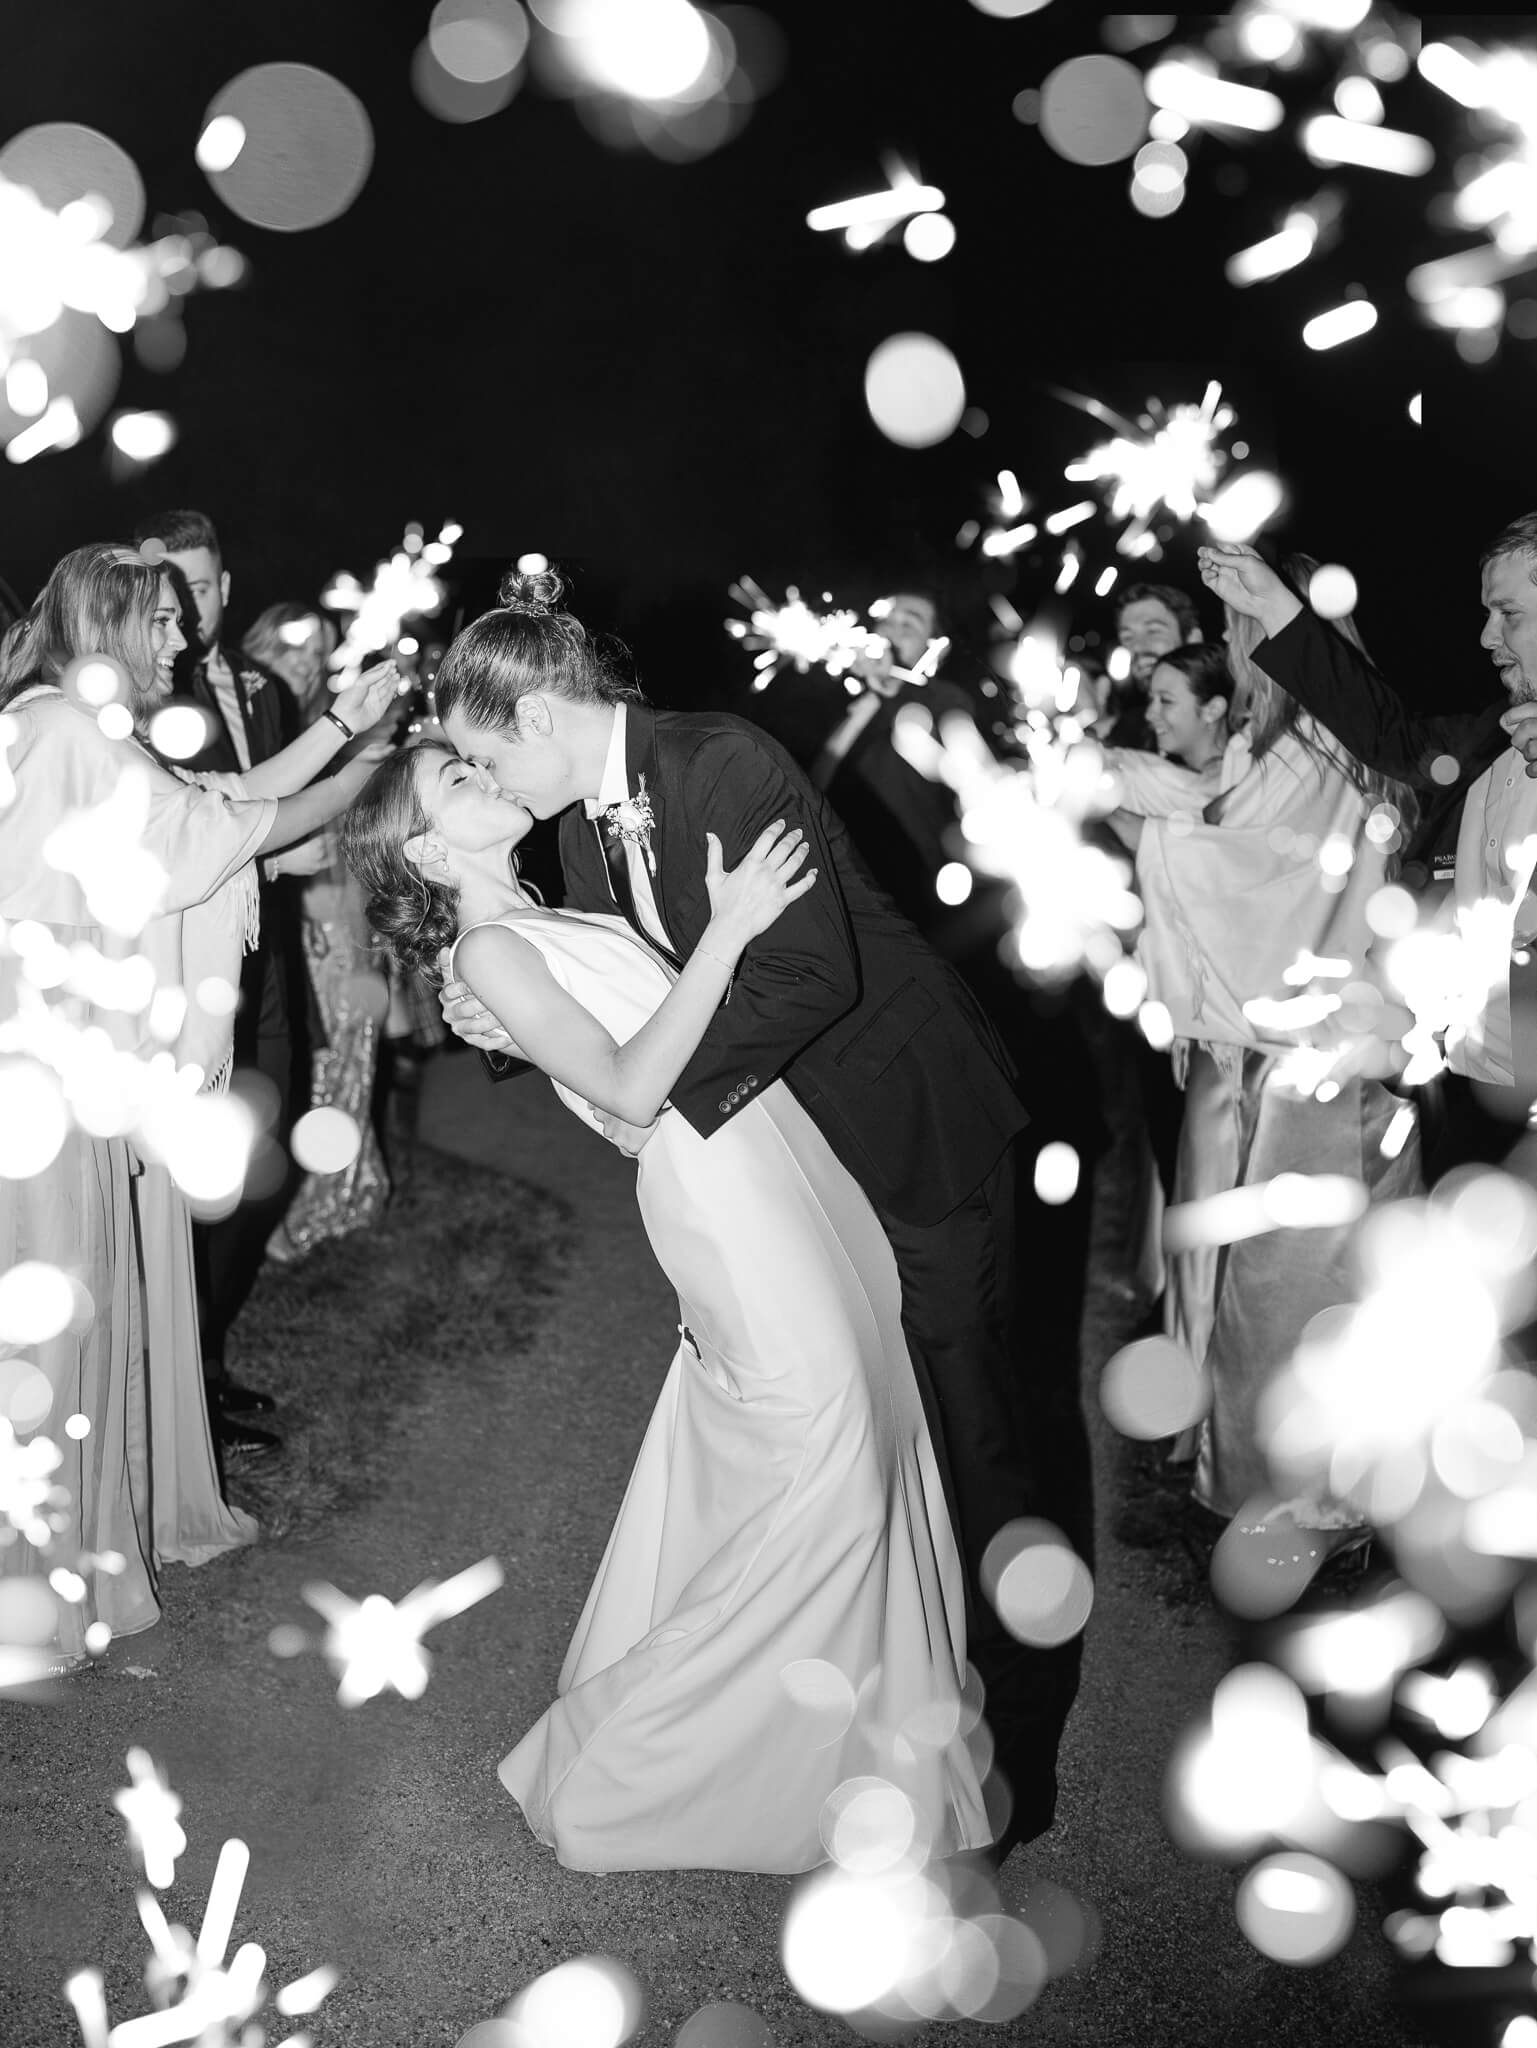 A black and white of a groom dipping and kissing his bride during the sparkler exit.